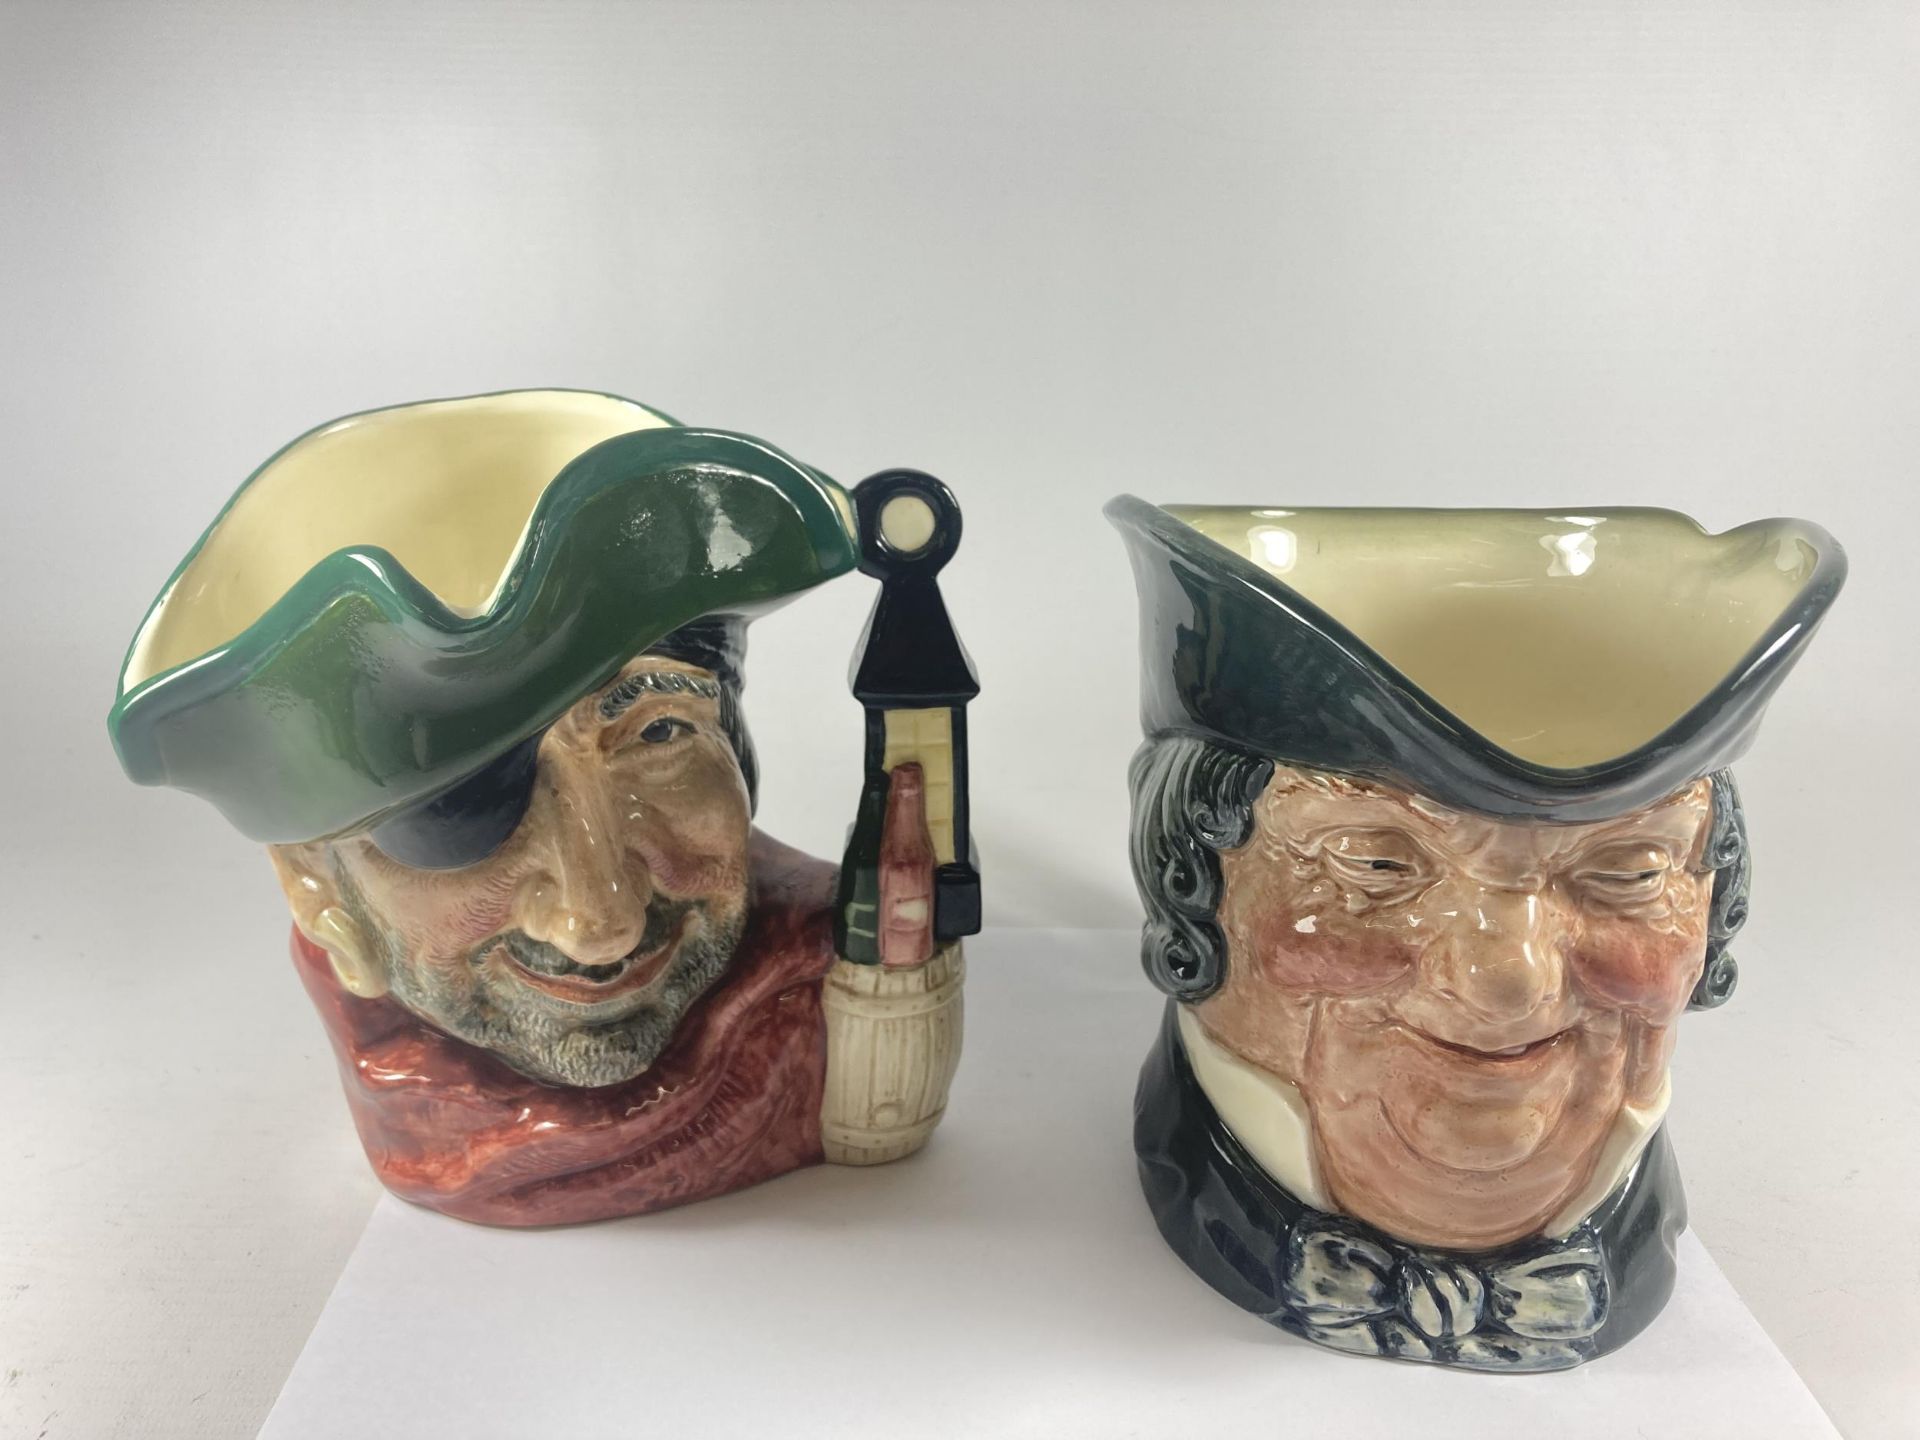 TWO ROYAL DOULTON TOBY JUGS TO INCLUDE PARSON BROWN AND SMUGGLER